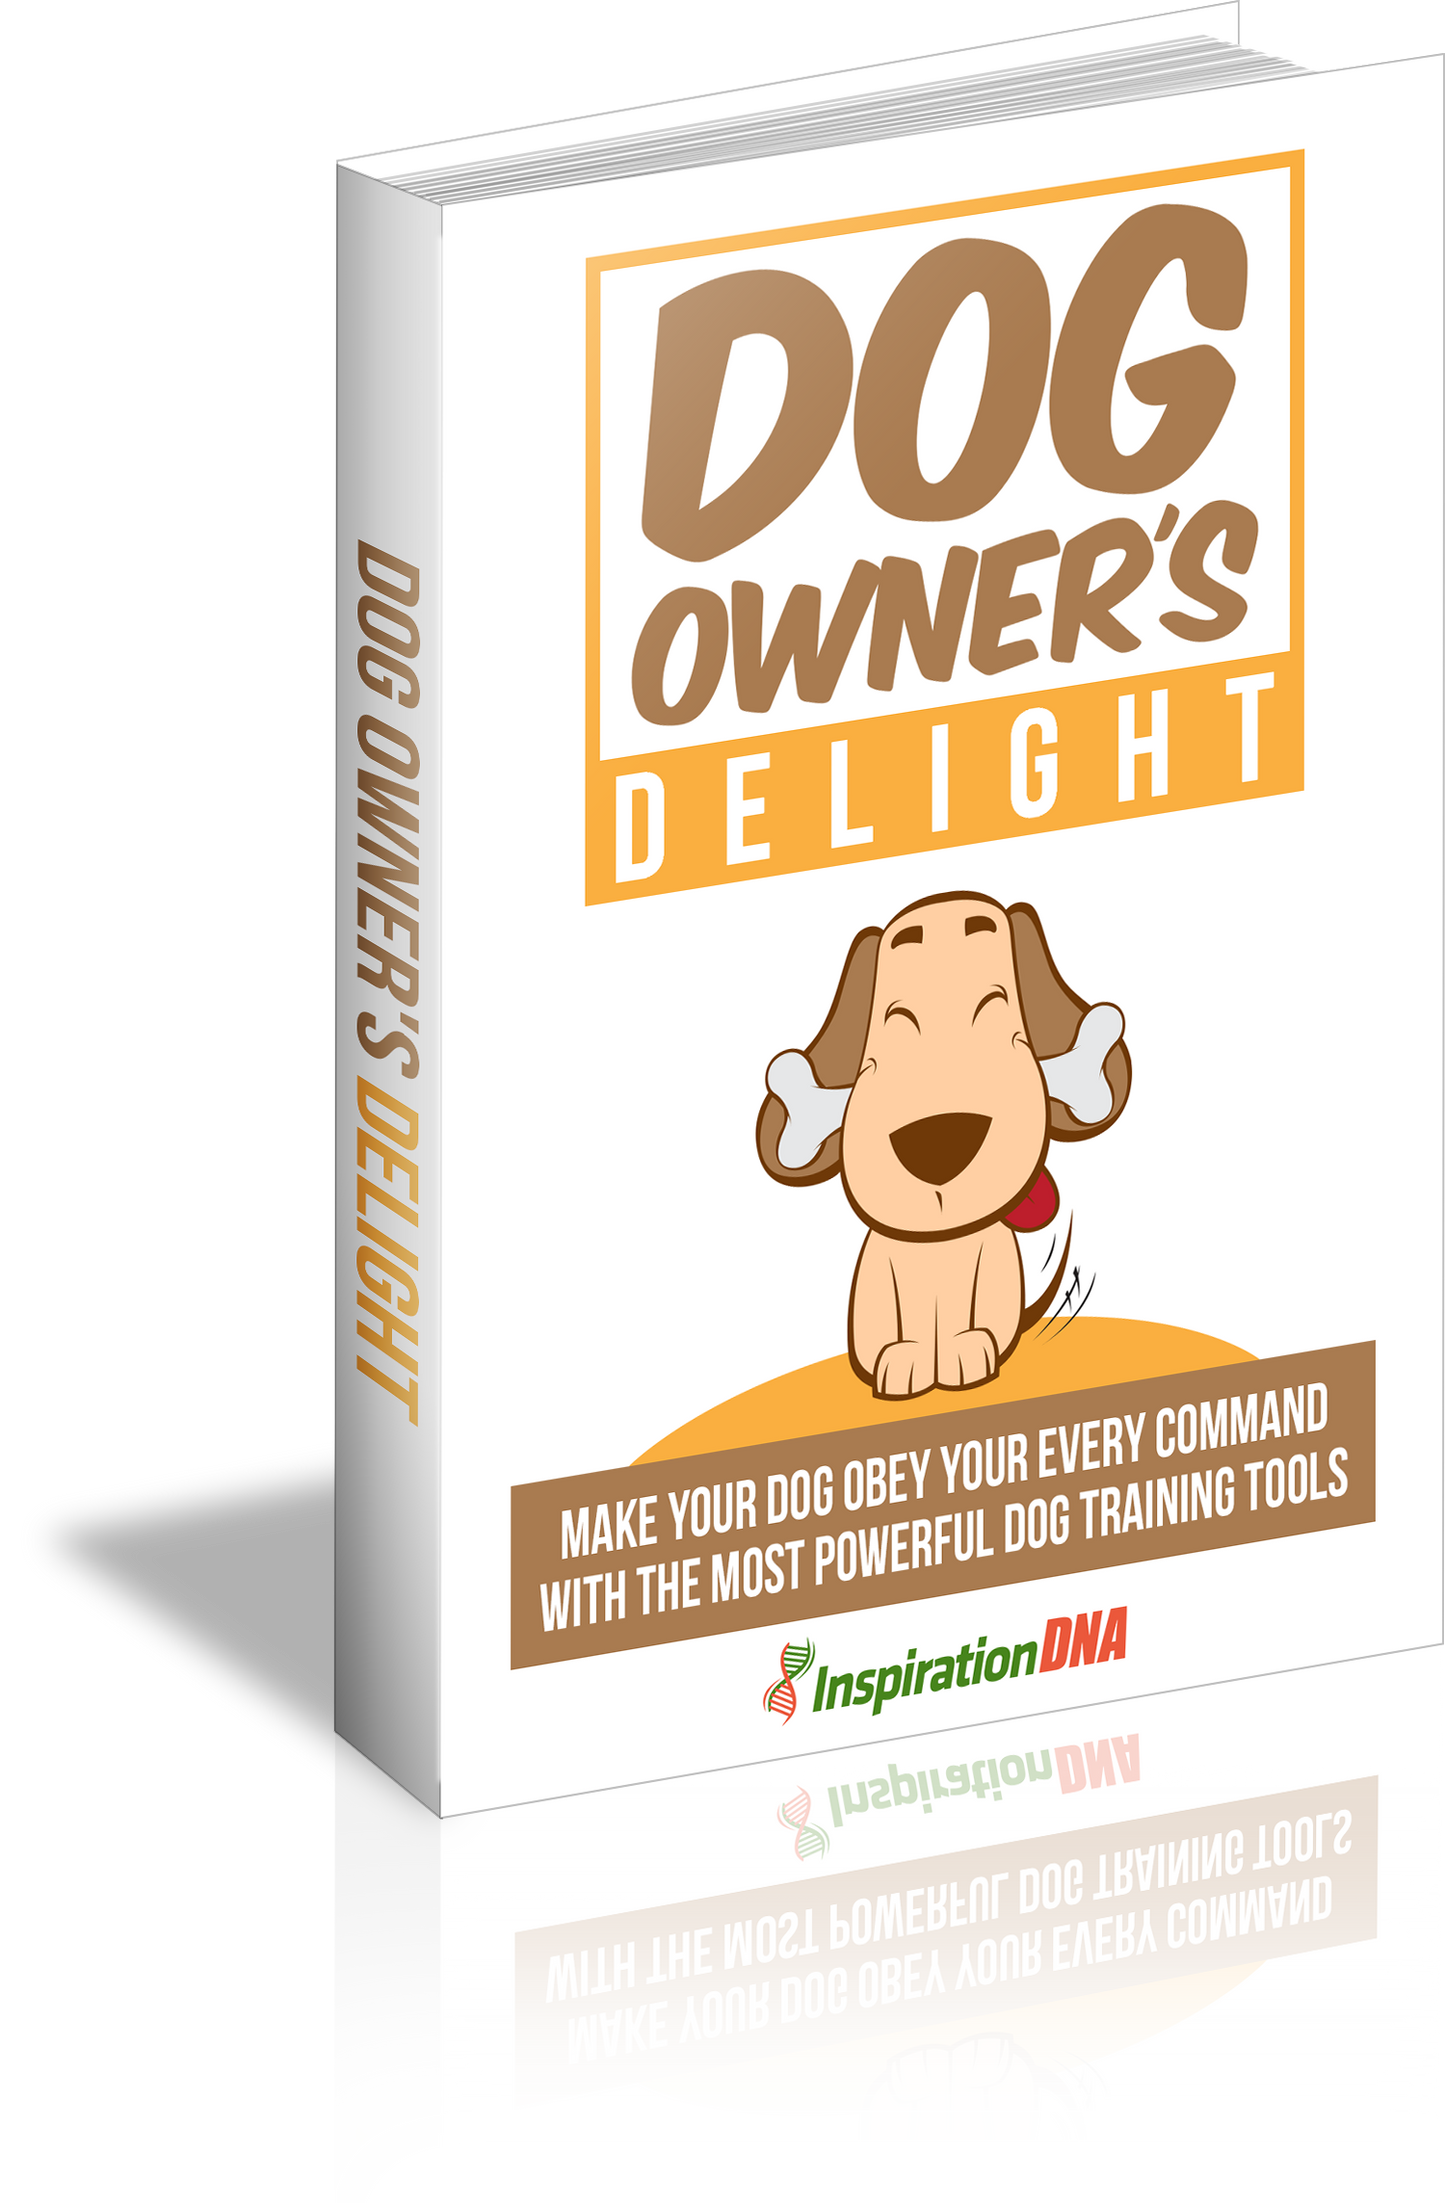 Dog Health and Dog Owner's Delight eBook